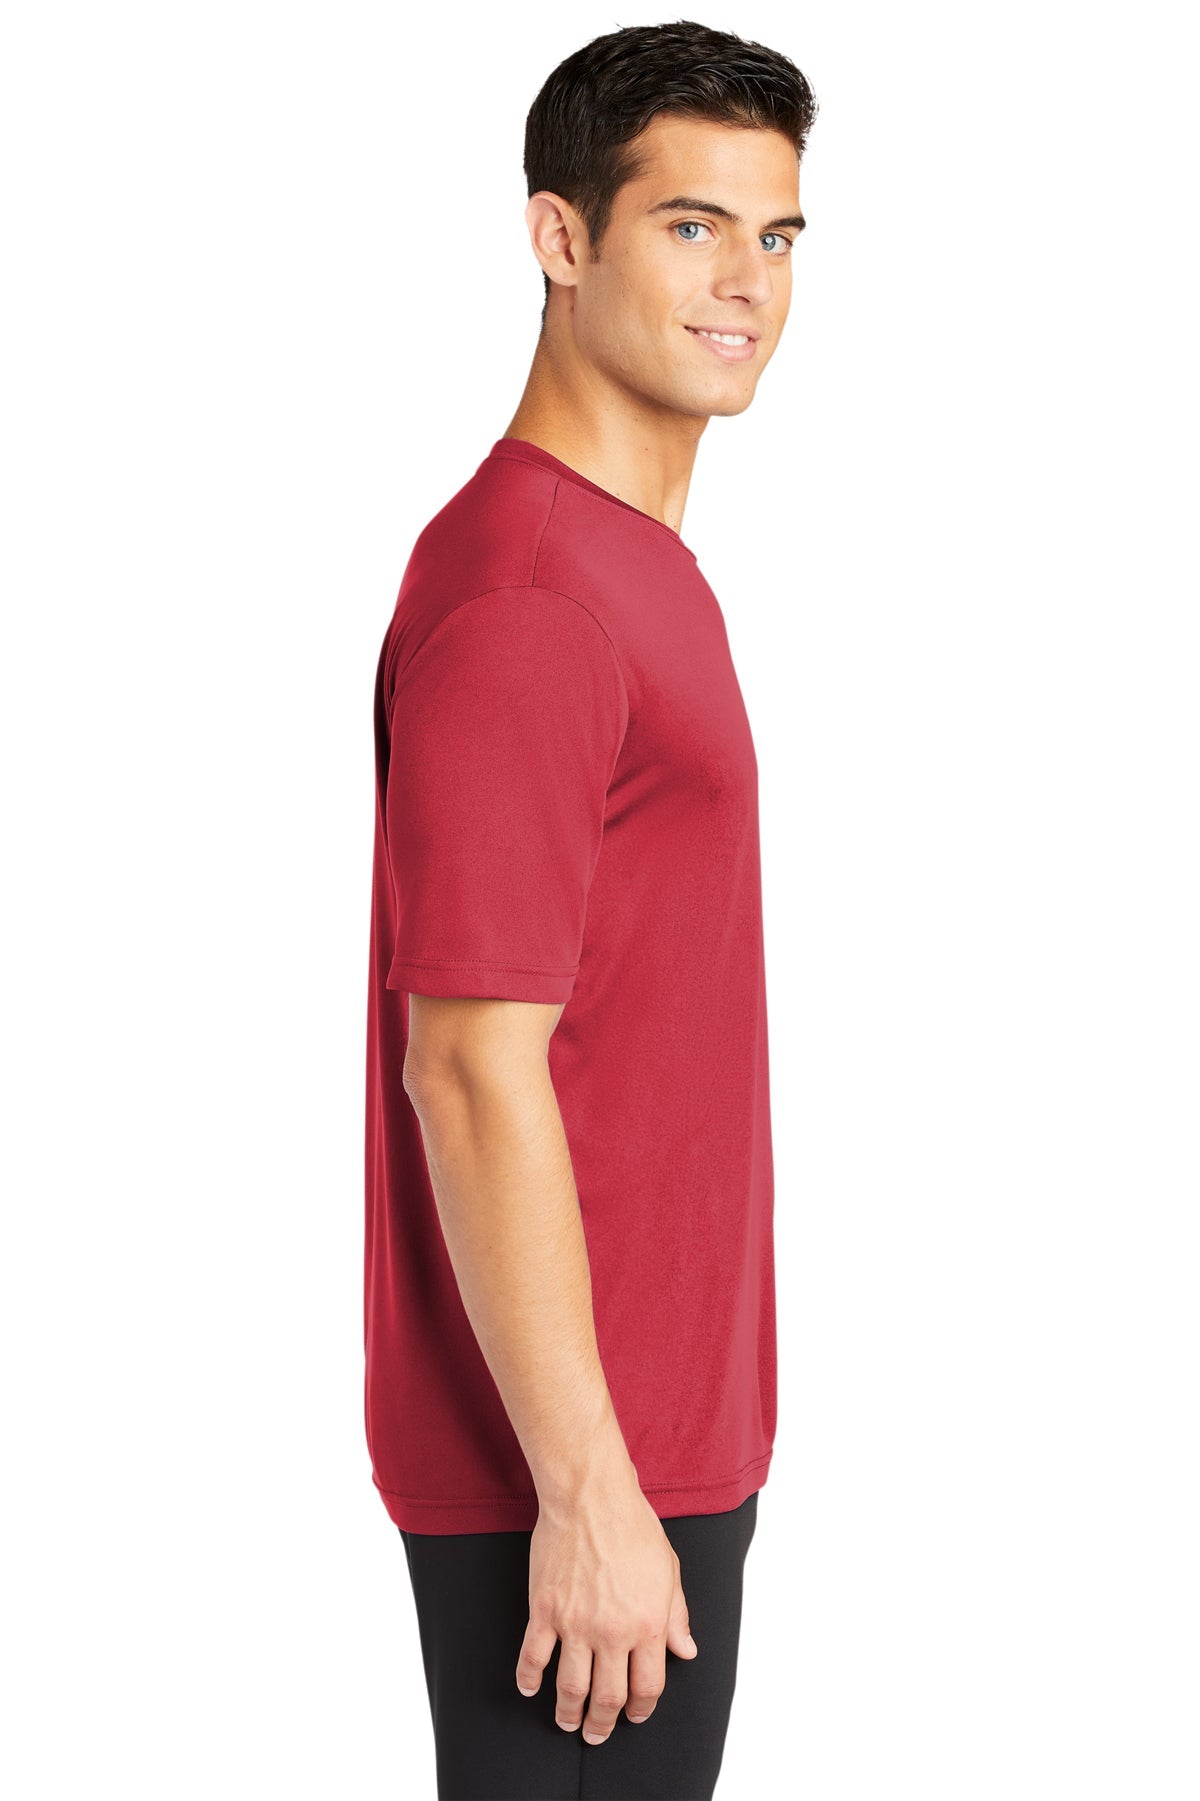 Sport-Tek Tall PosiCharge Branded Competitor Tee's, True Red